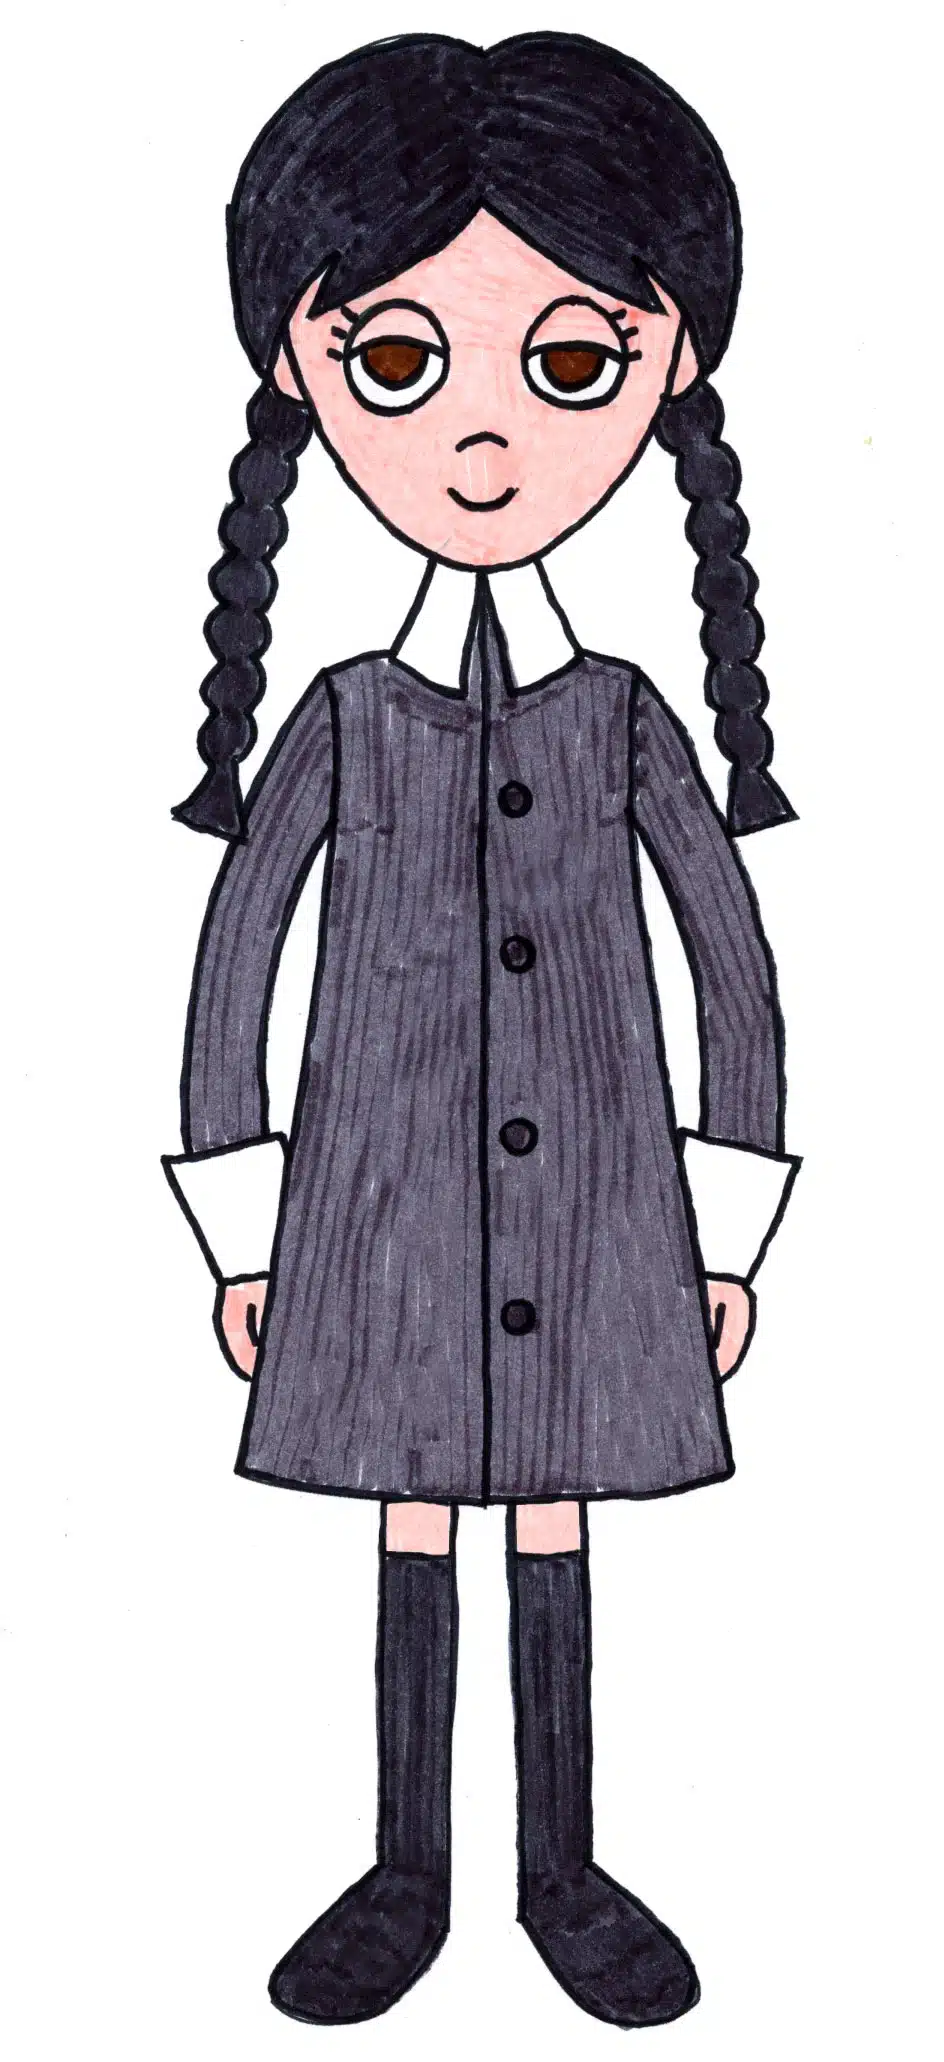 Easy how to draw wednesday addams tutorial video